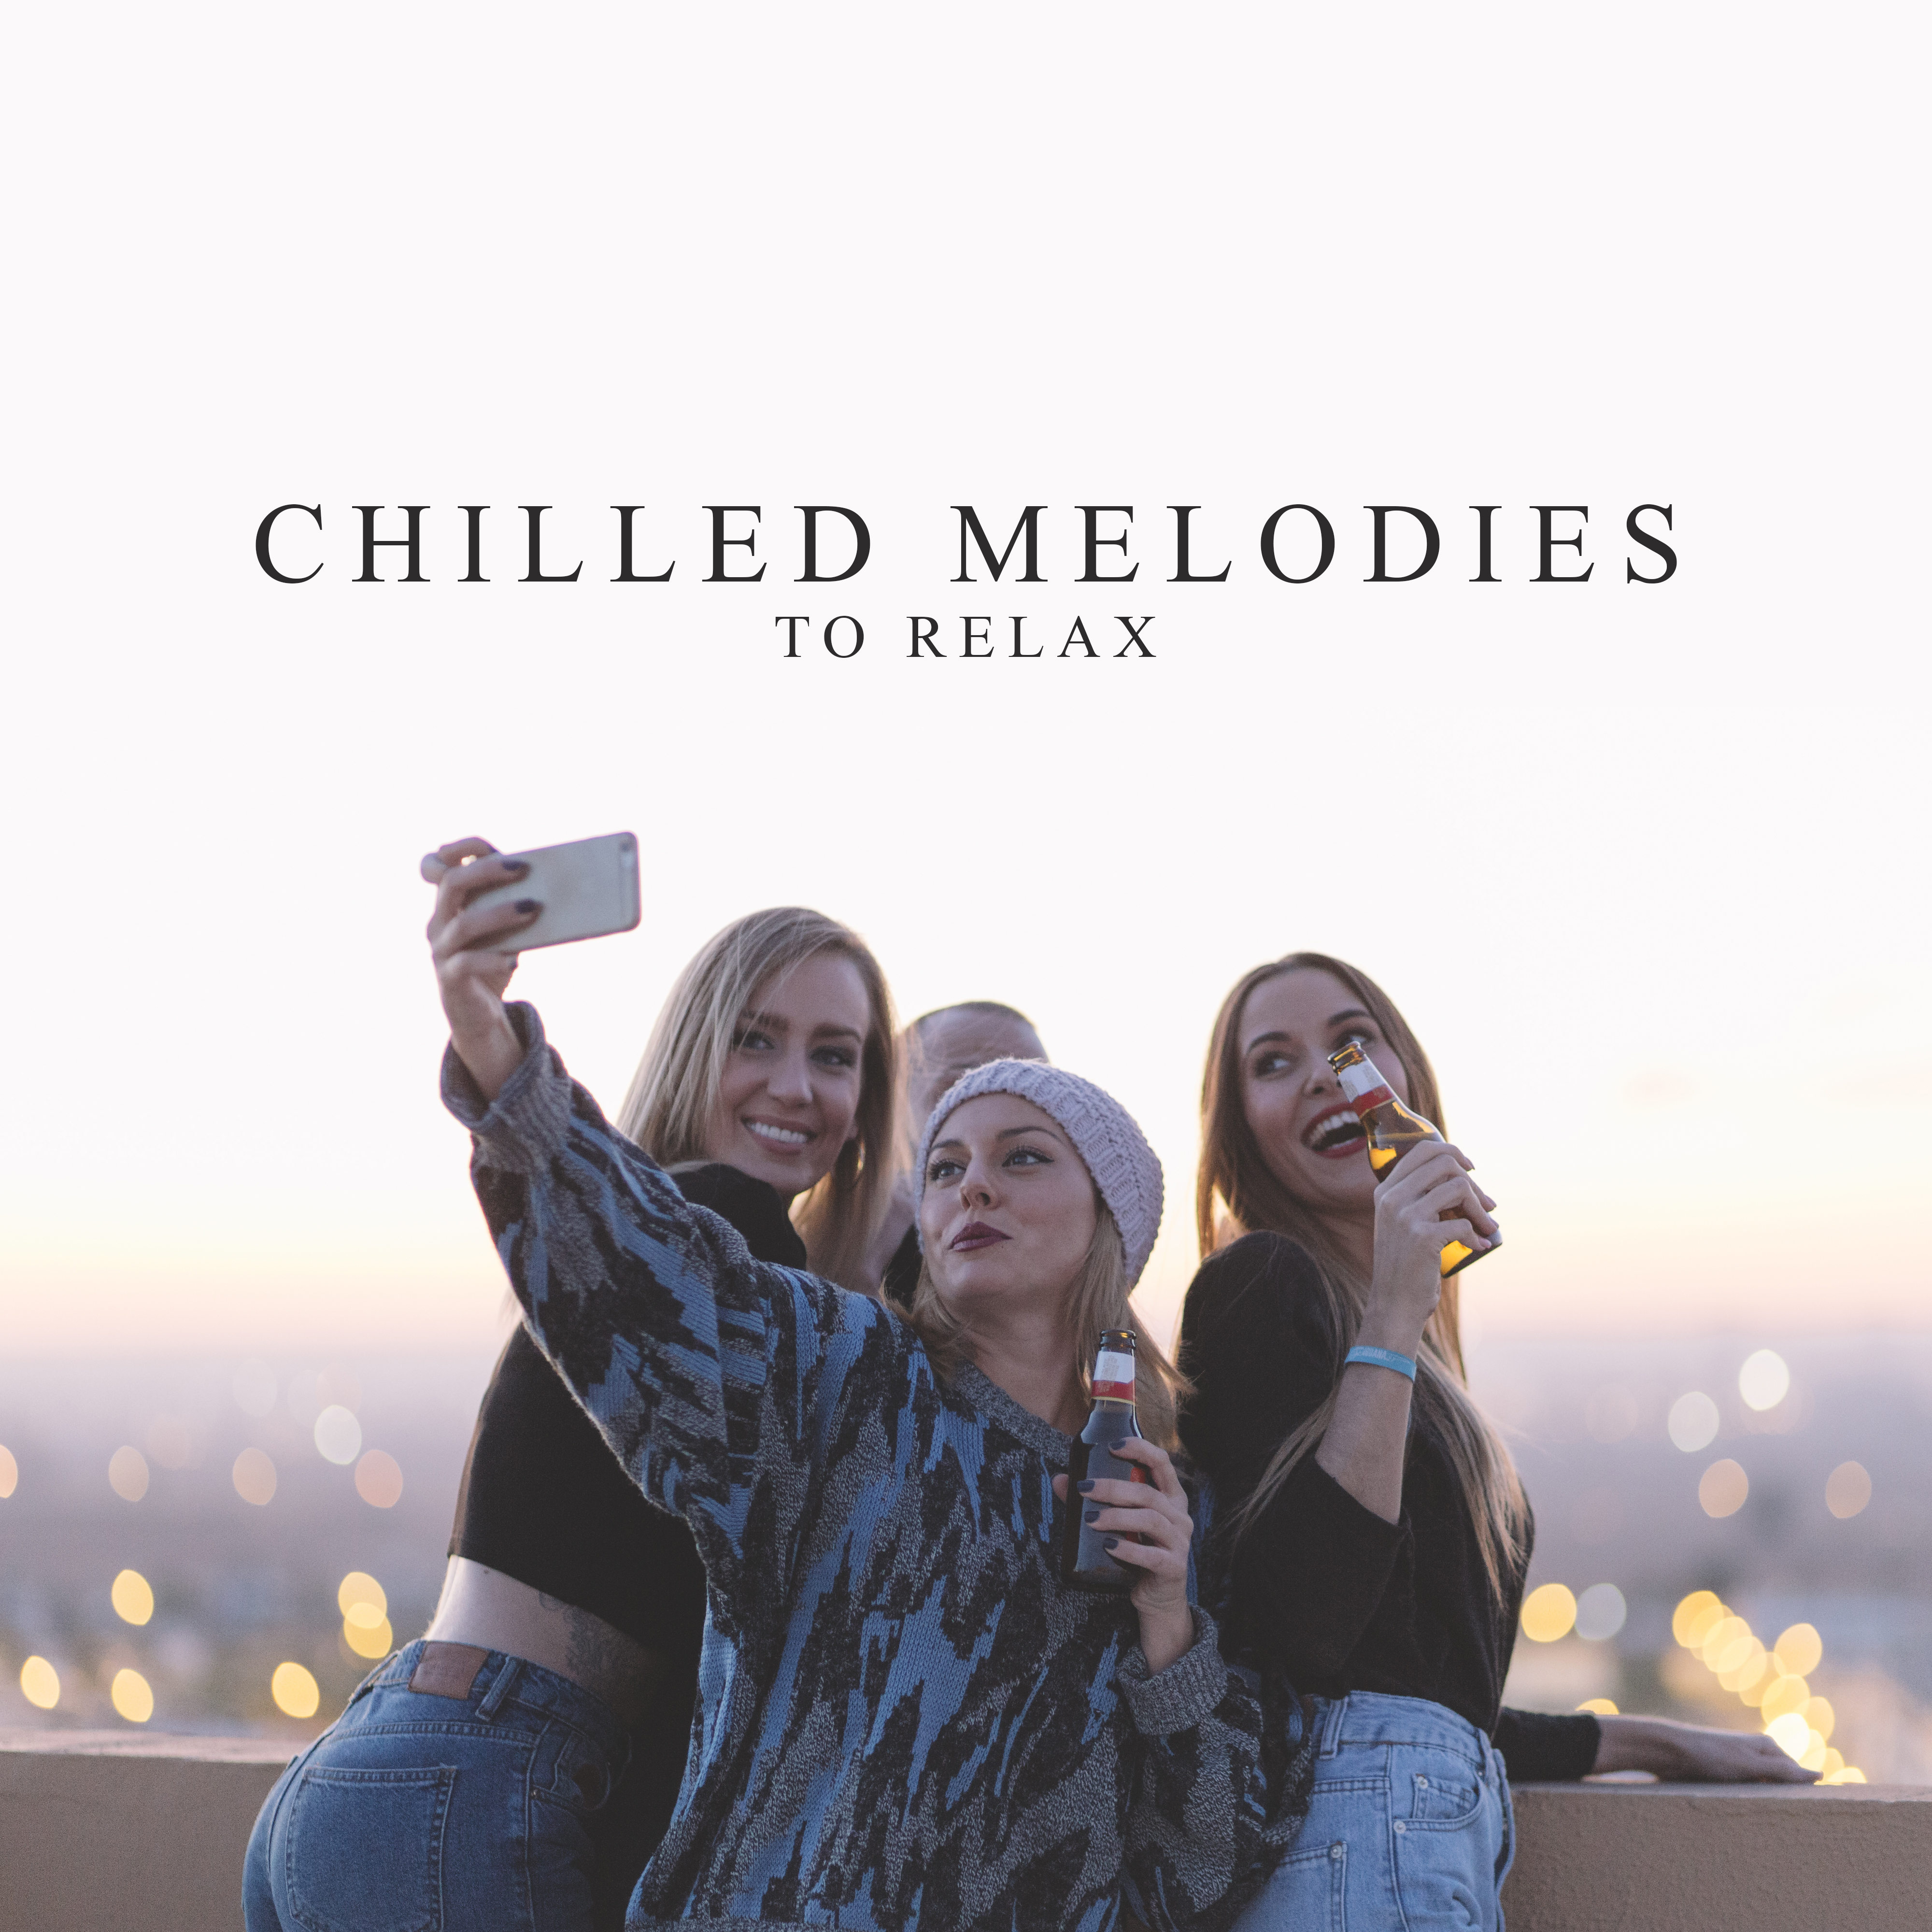 Chilled Melodies to Relax